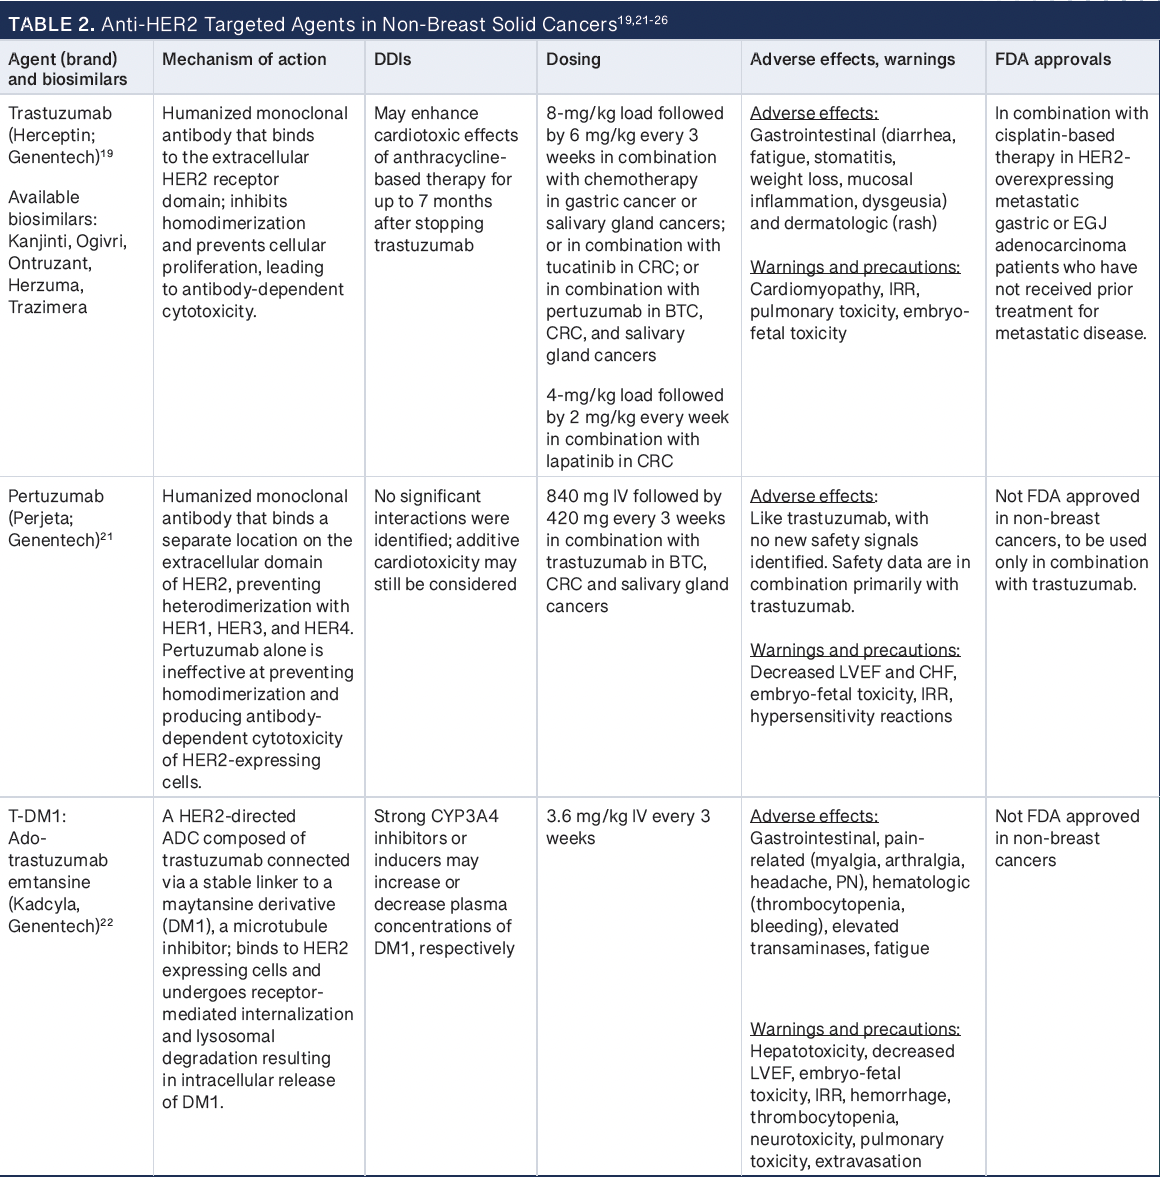 Table 2 -- ADC, antibody-drug conjugate; BTC, biliary tract cancer; CHF, congestive heart failure; CRC, colorectal cancer; DDI, drug-drug interaction; EGJ, esophagogastric junction; IRR, infusion-related reaction; IV, intravenous; LVEF, left ventricular ejection fraction; PN, peripheral neuropathy.